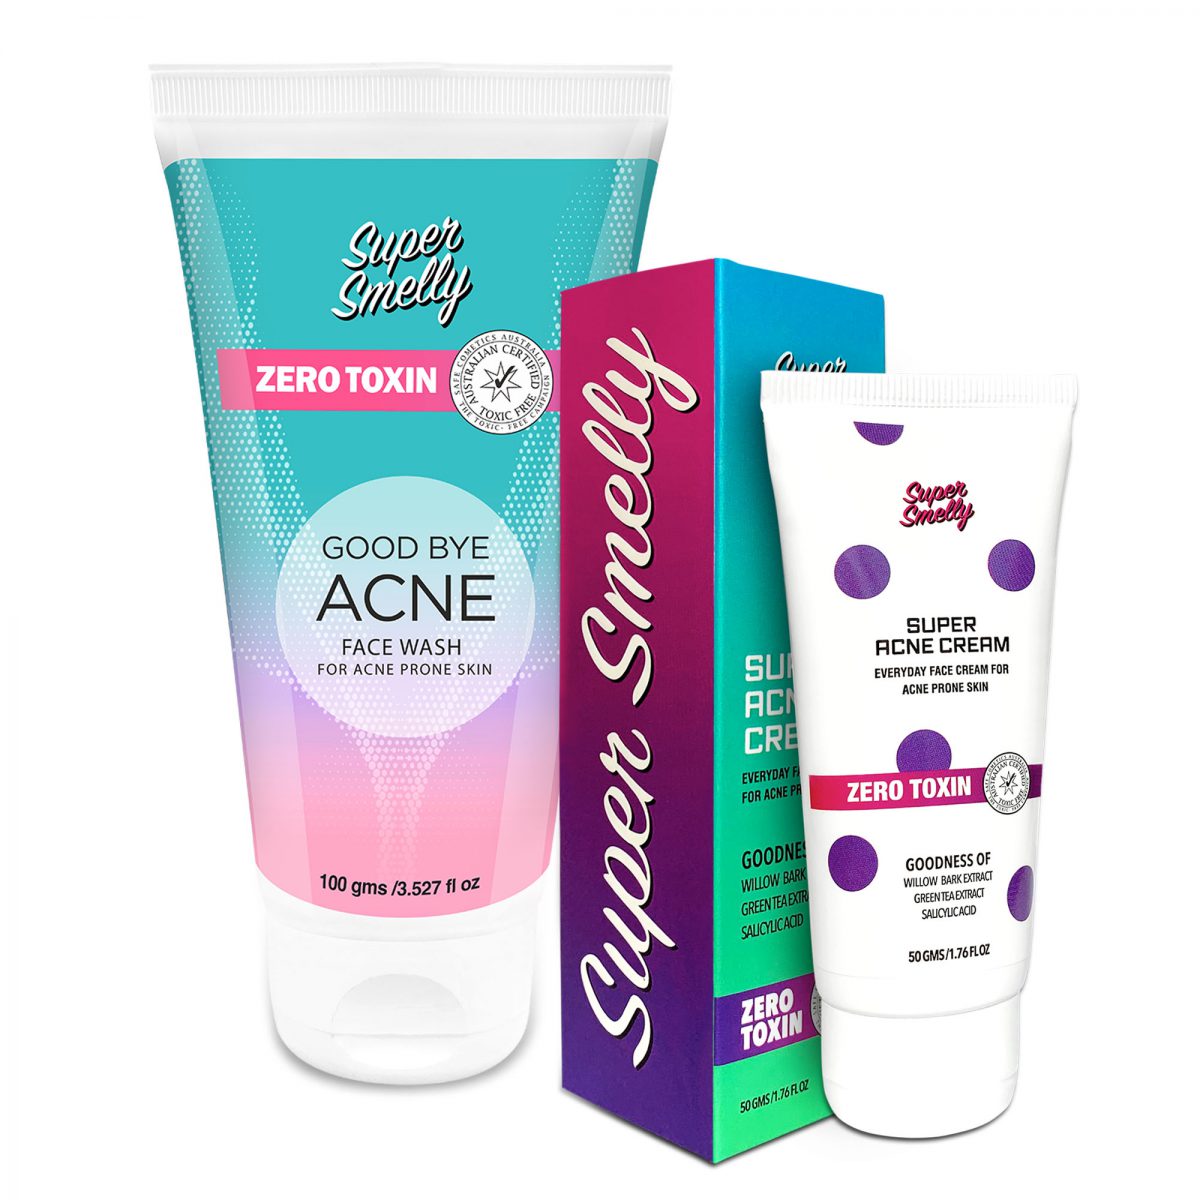 Adieu Acne Combo | Goodby Acne Face Wash + Super Anti Acne Face Cream | best face wash for acne and oily skin | oil free acne face wash | best face wash for pimples and dark spots | best face wash to remove pimples | oily skin pimples face wash